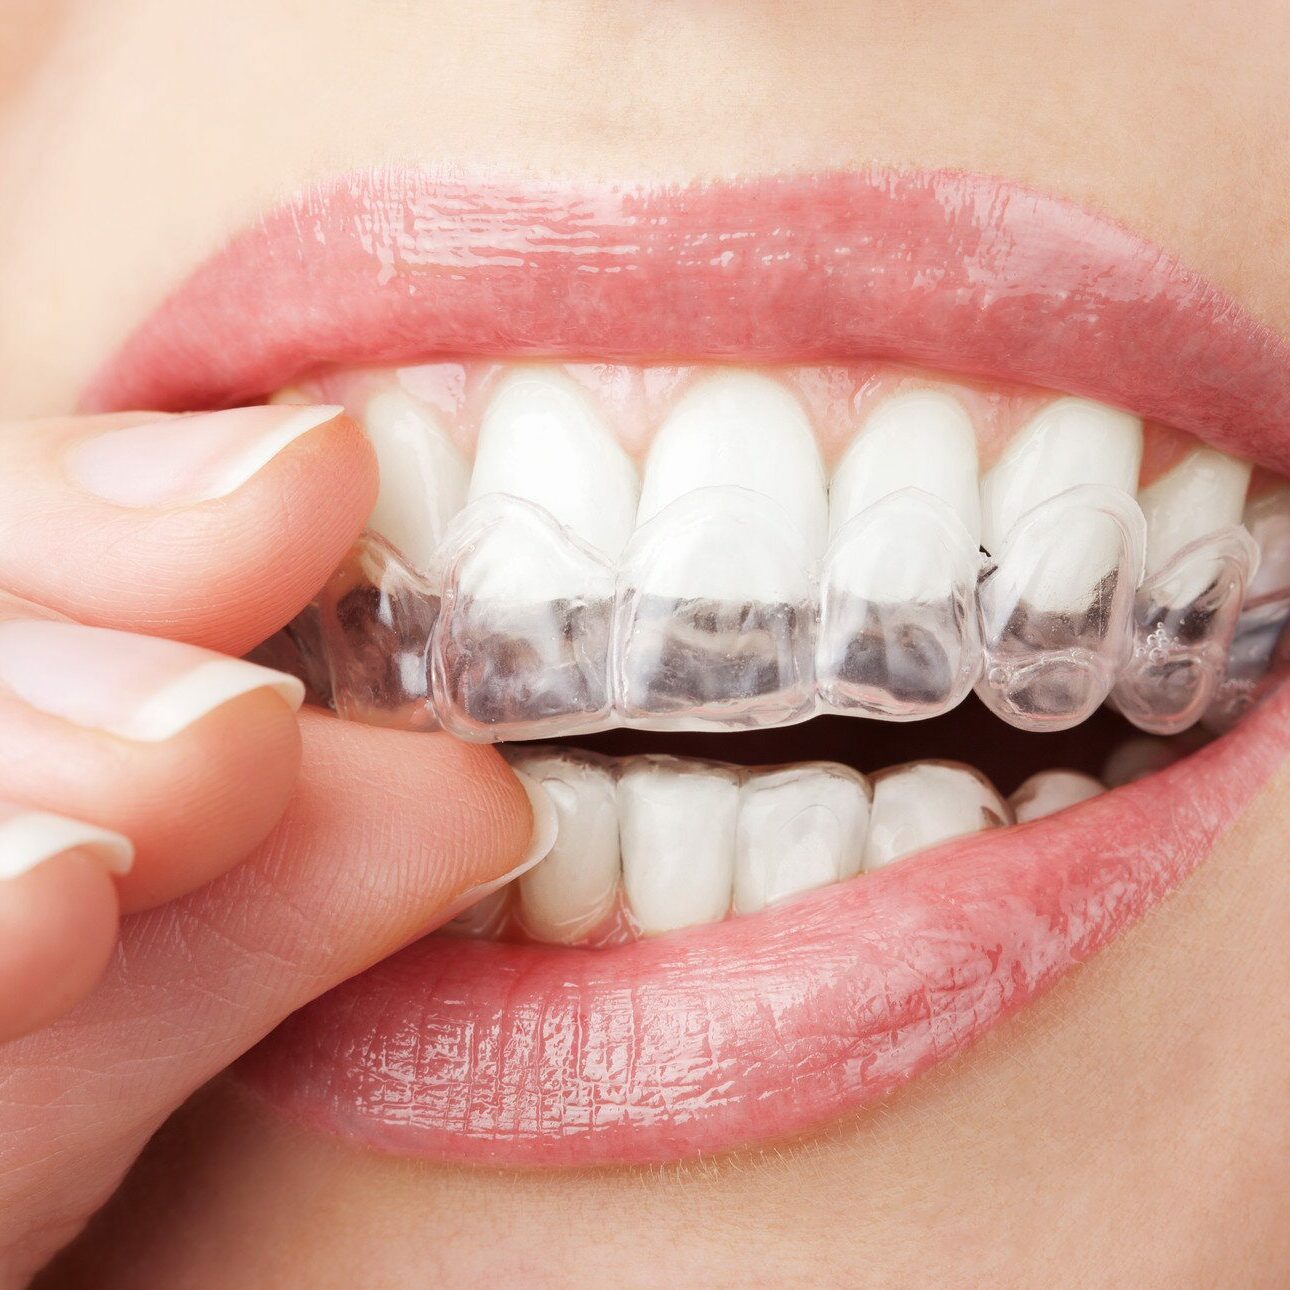 https://www.butterflydental.net/wp-content/uploads/bb-plugin/cache/ClearAligners-square.jpg